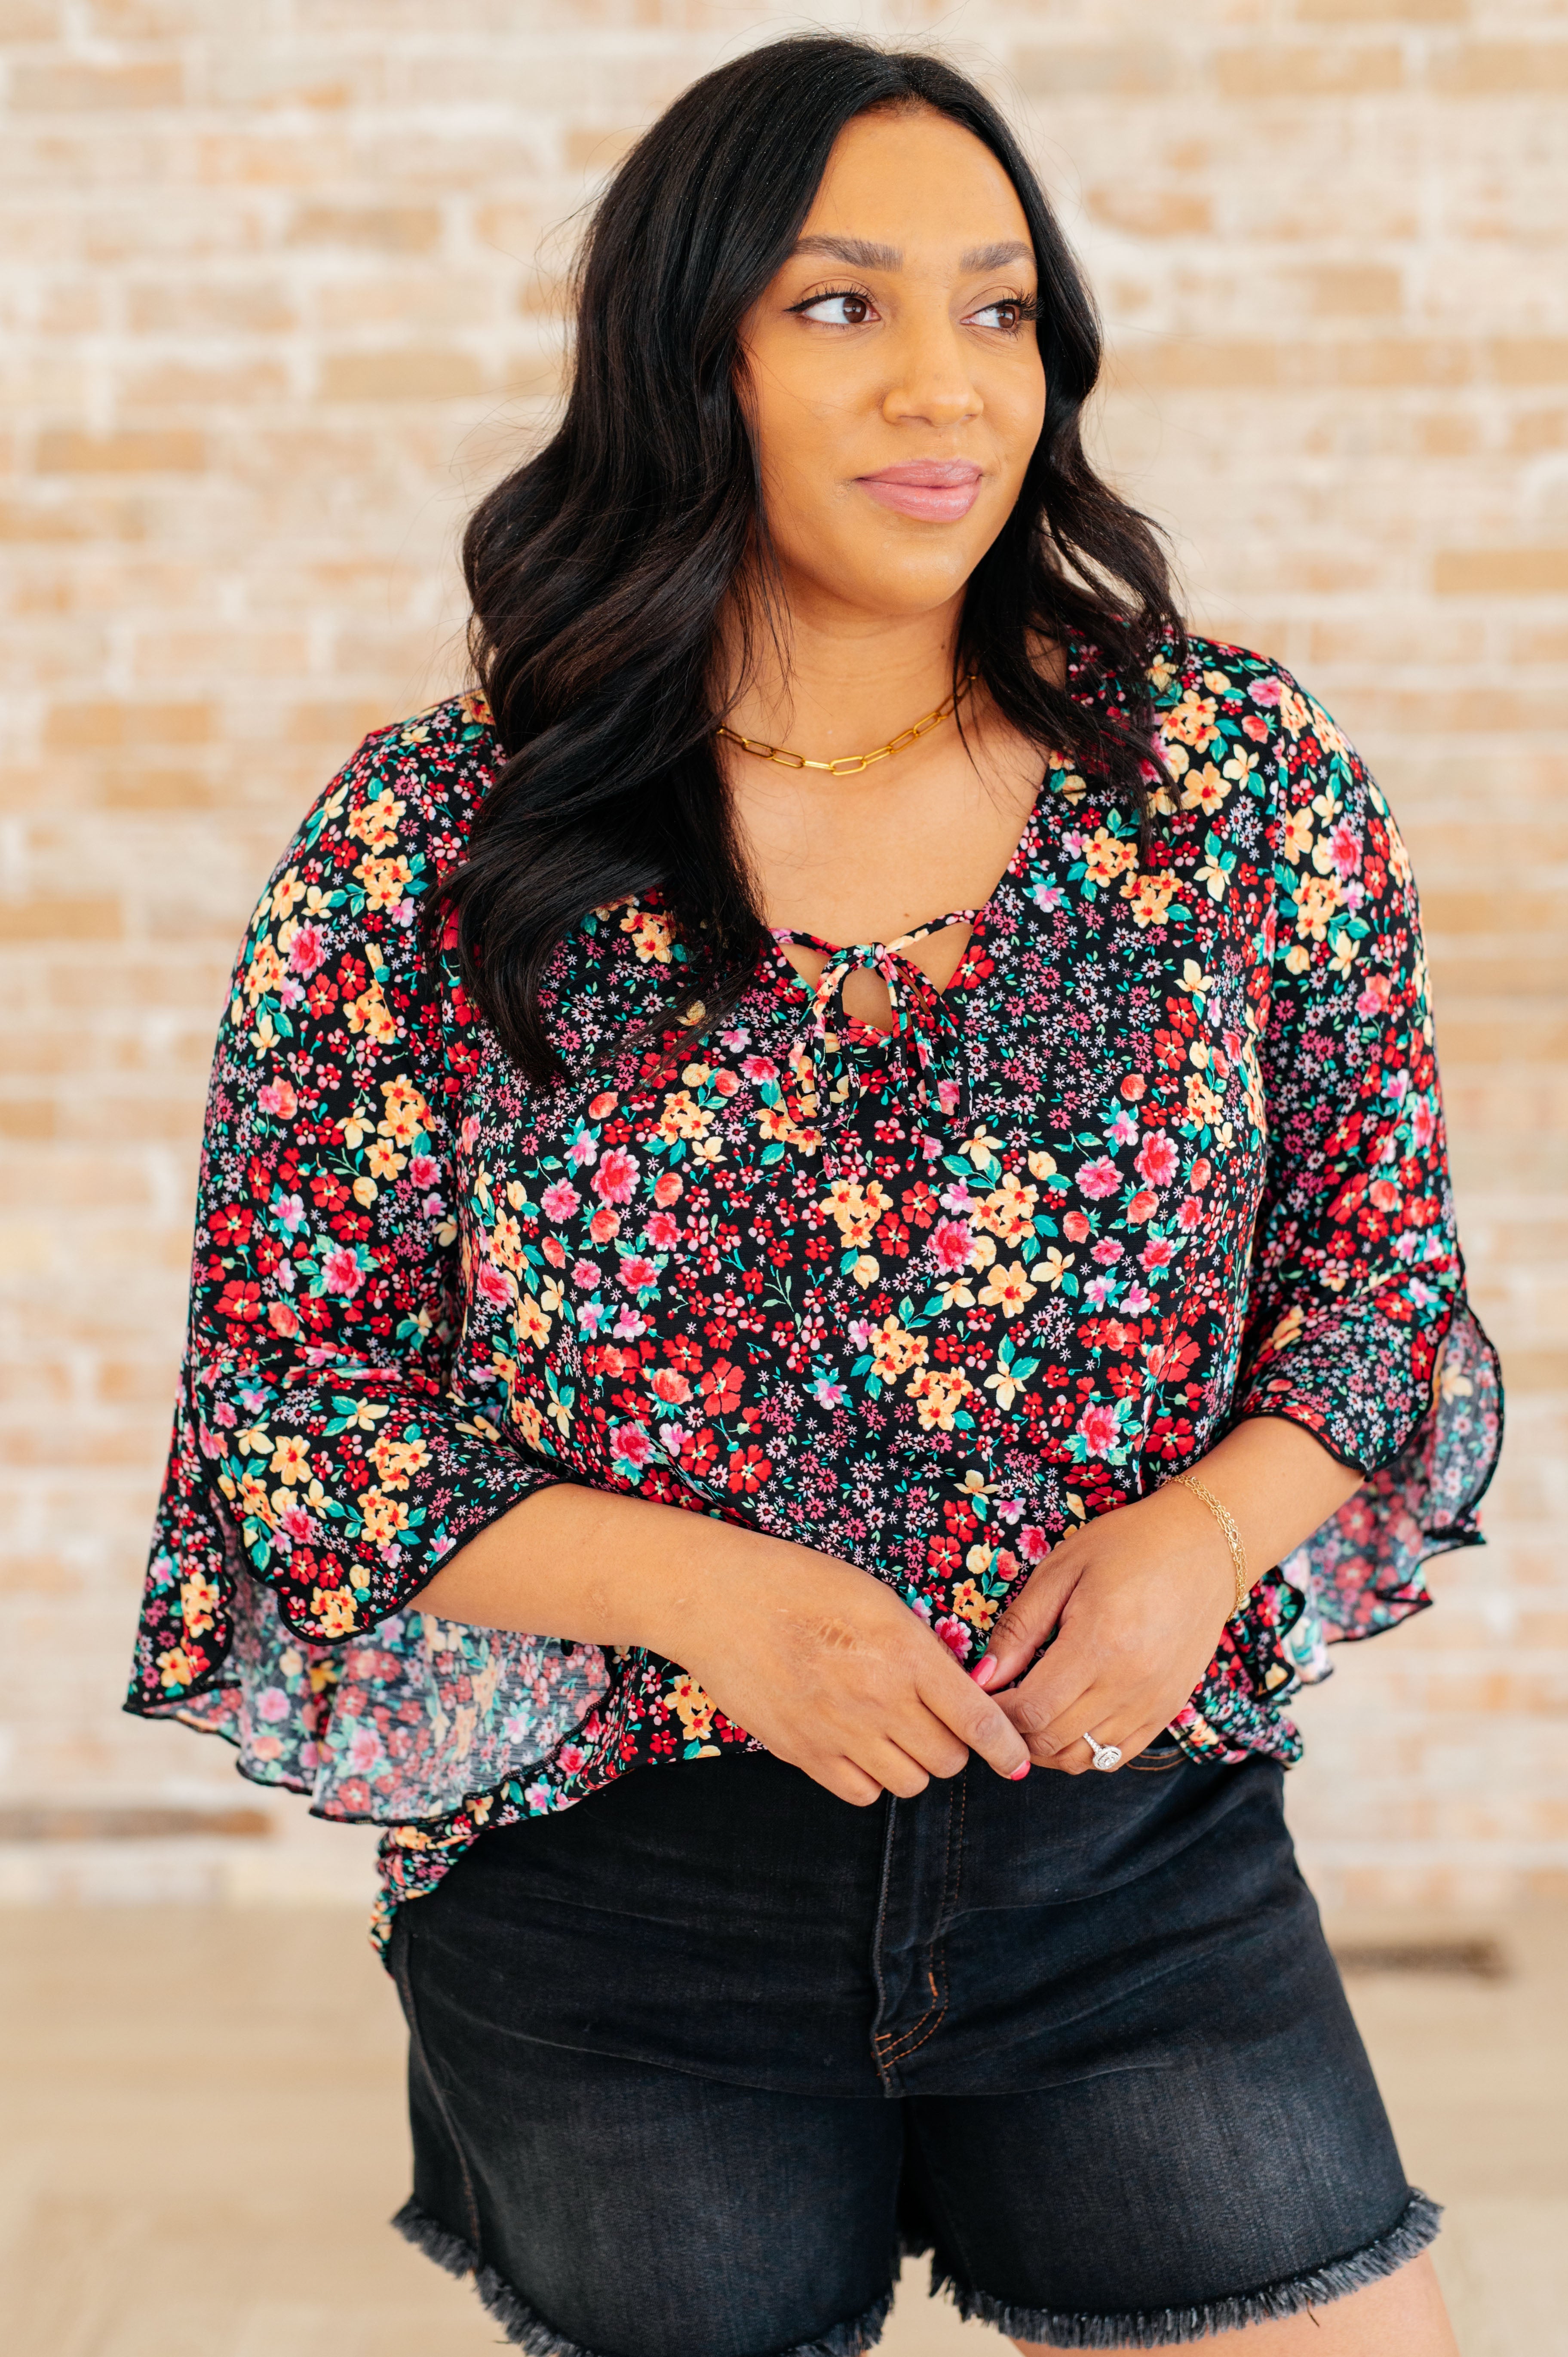 Willow Bell Sleeve Top in Black Multi Ditsy Floral Tops Ave Shops   